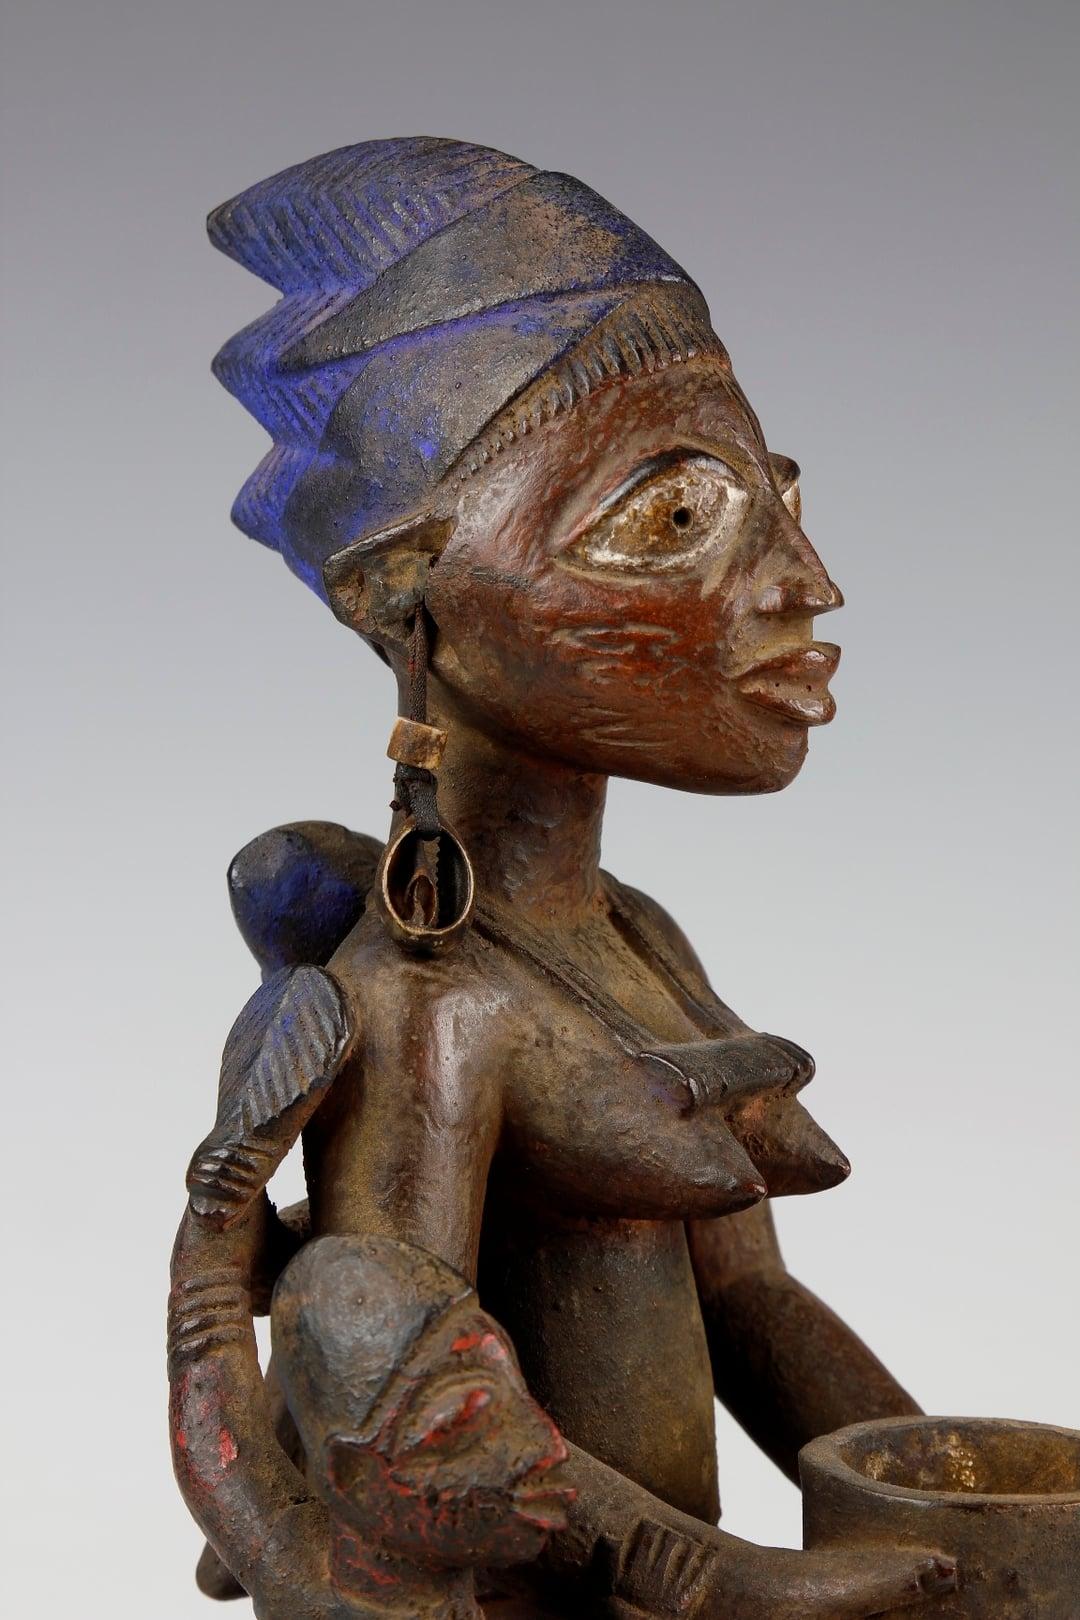 This finely carved early twentieth-century figure, from the Yoruba culture in Nigeria, depicts a mother and her two children. The mother is depicted in a kneeling position, holding a two-legged offering bowl. Crowning her head is a three-pronged